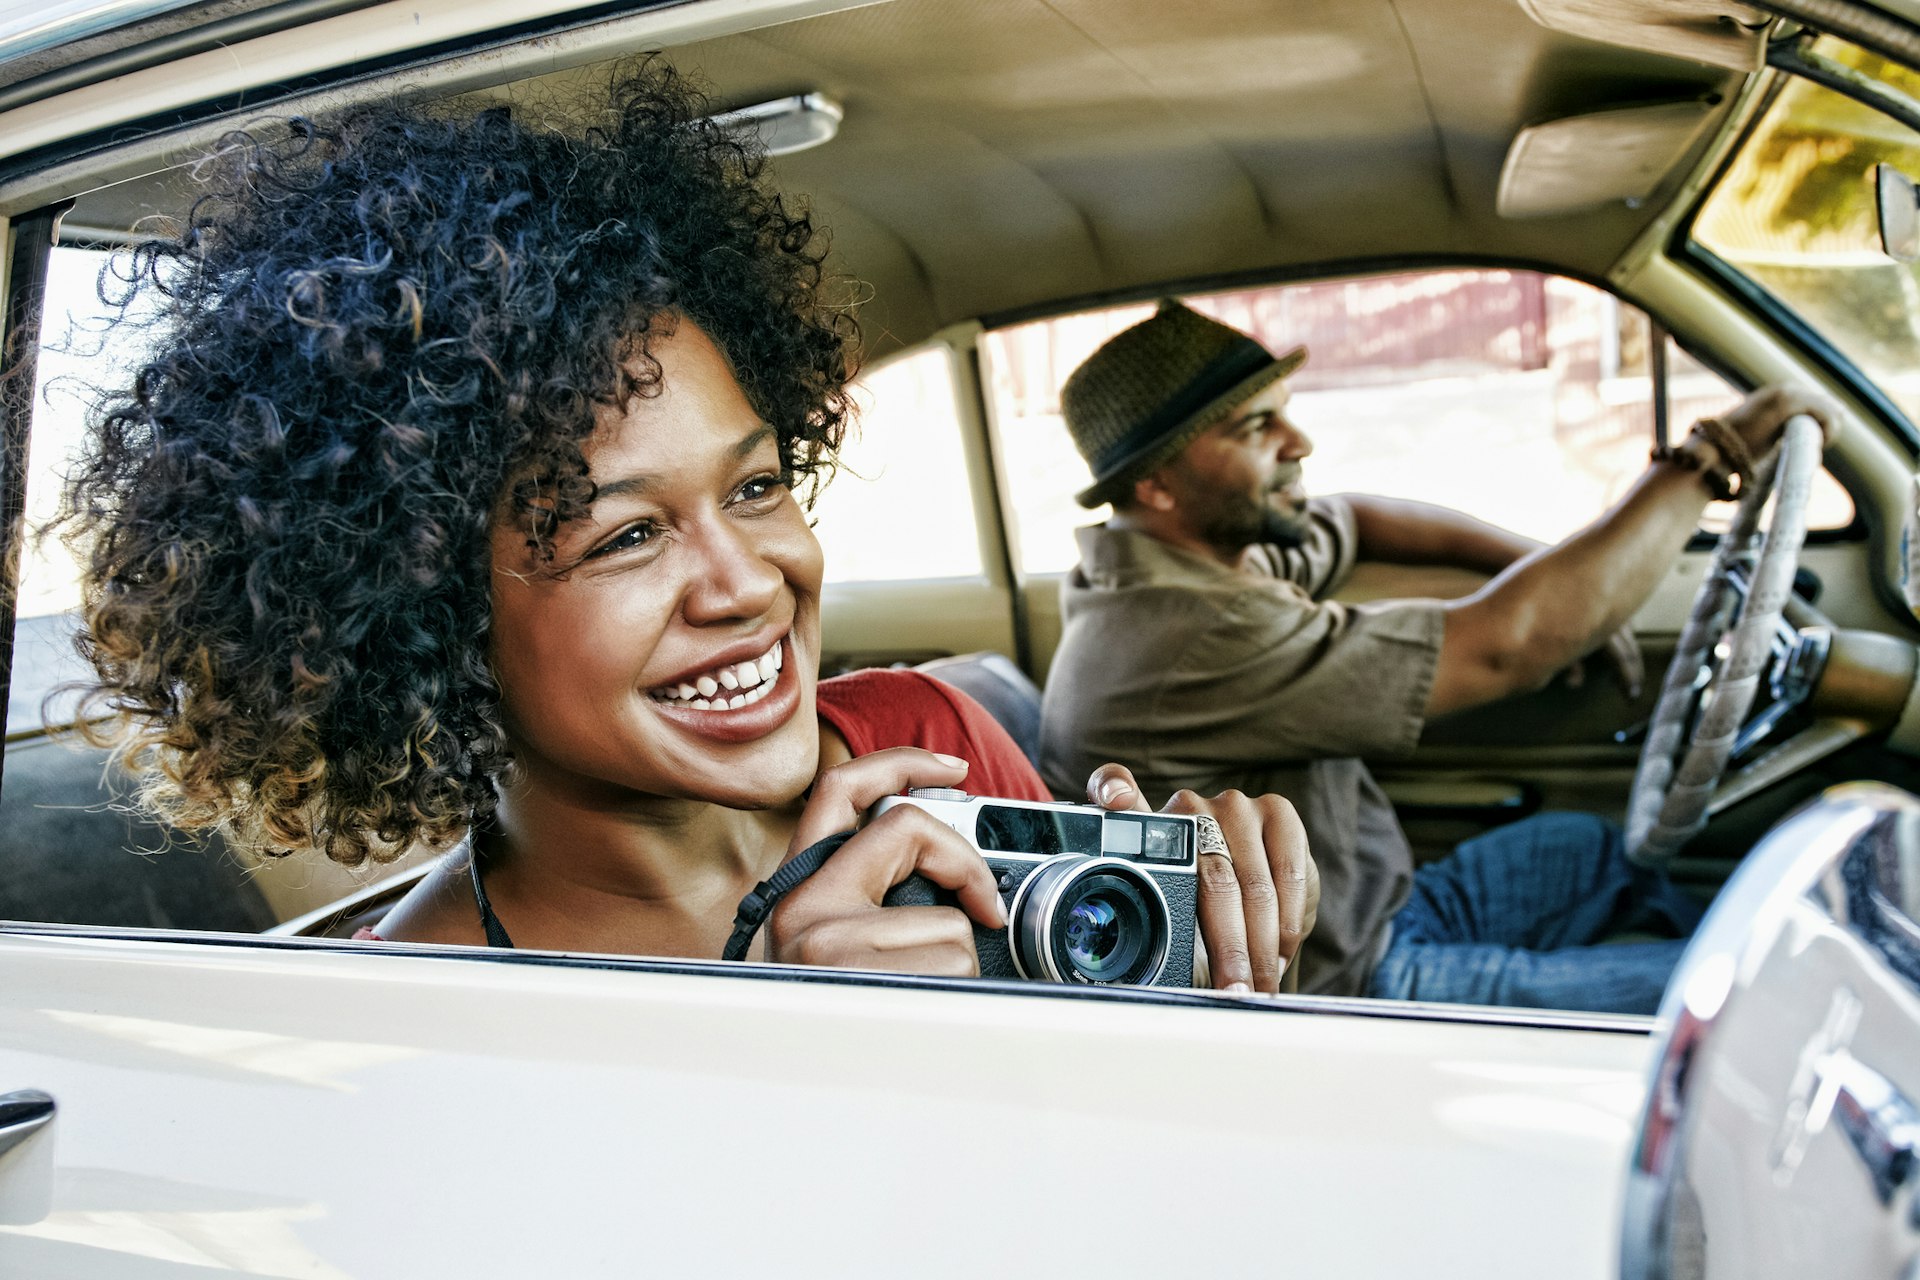 A man and woman driving in a vintage car, the woman is holding a camera and leaning toward the window